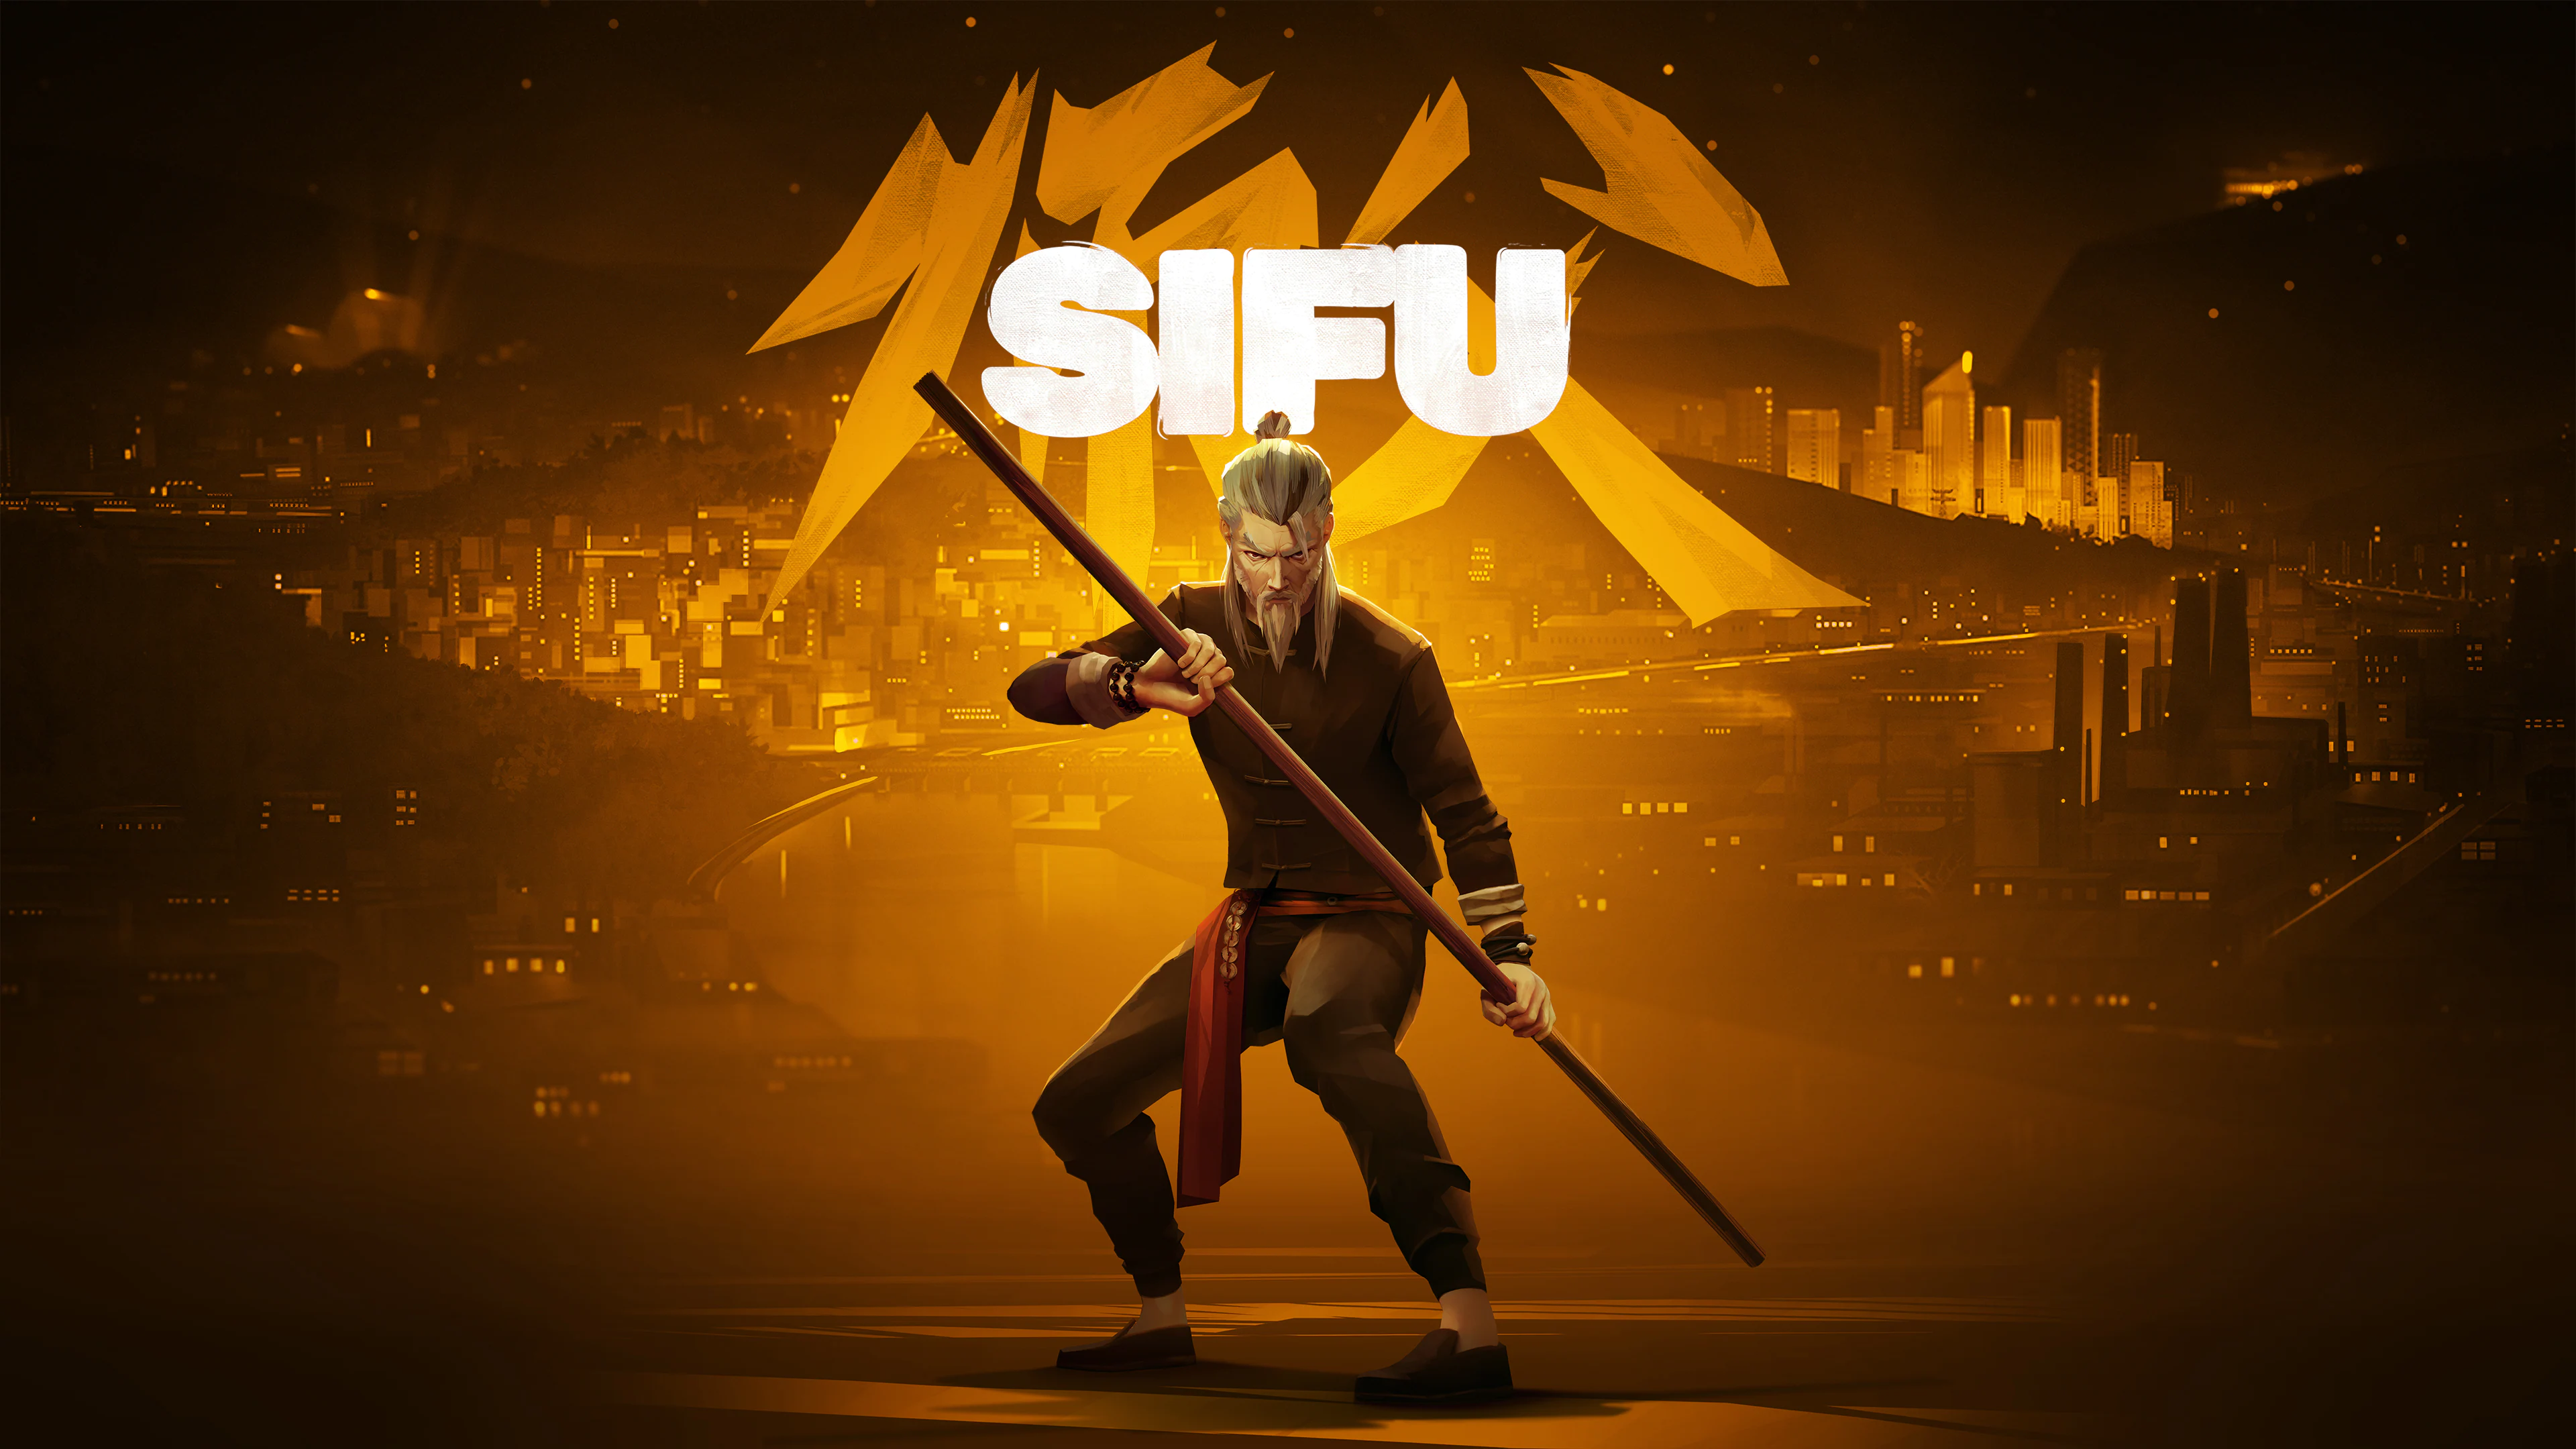 In September, action fighting game Sifu will receive its latest free update